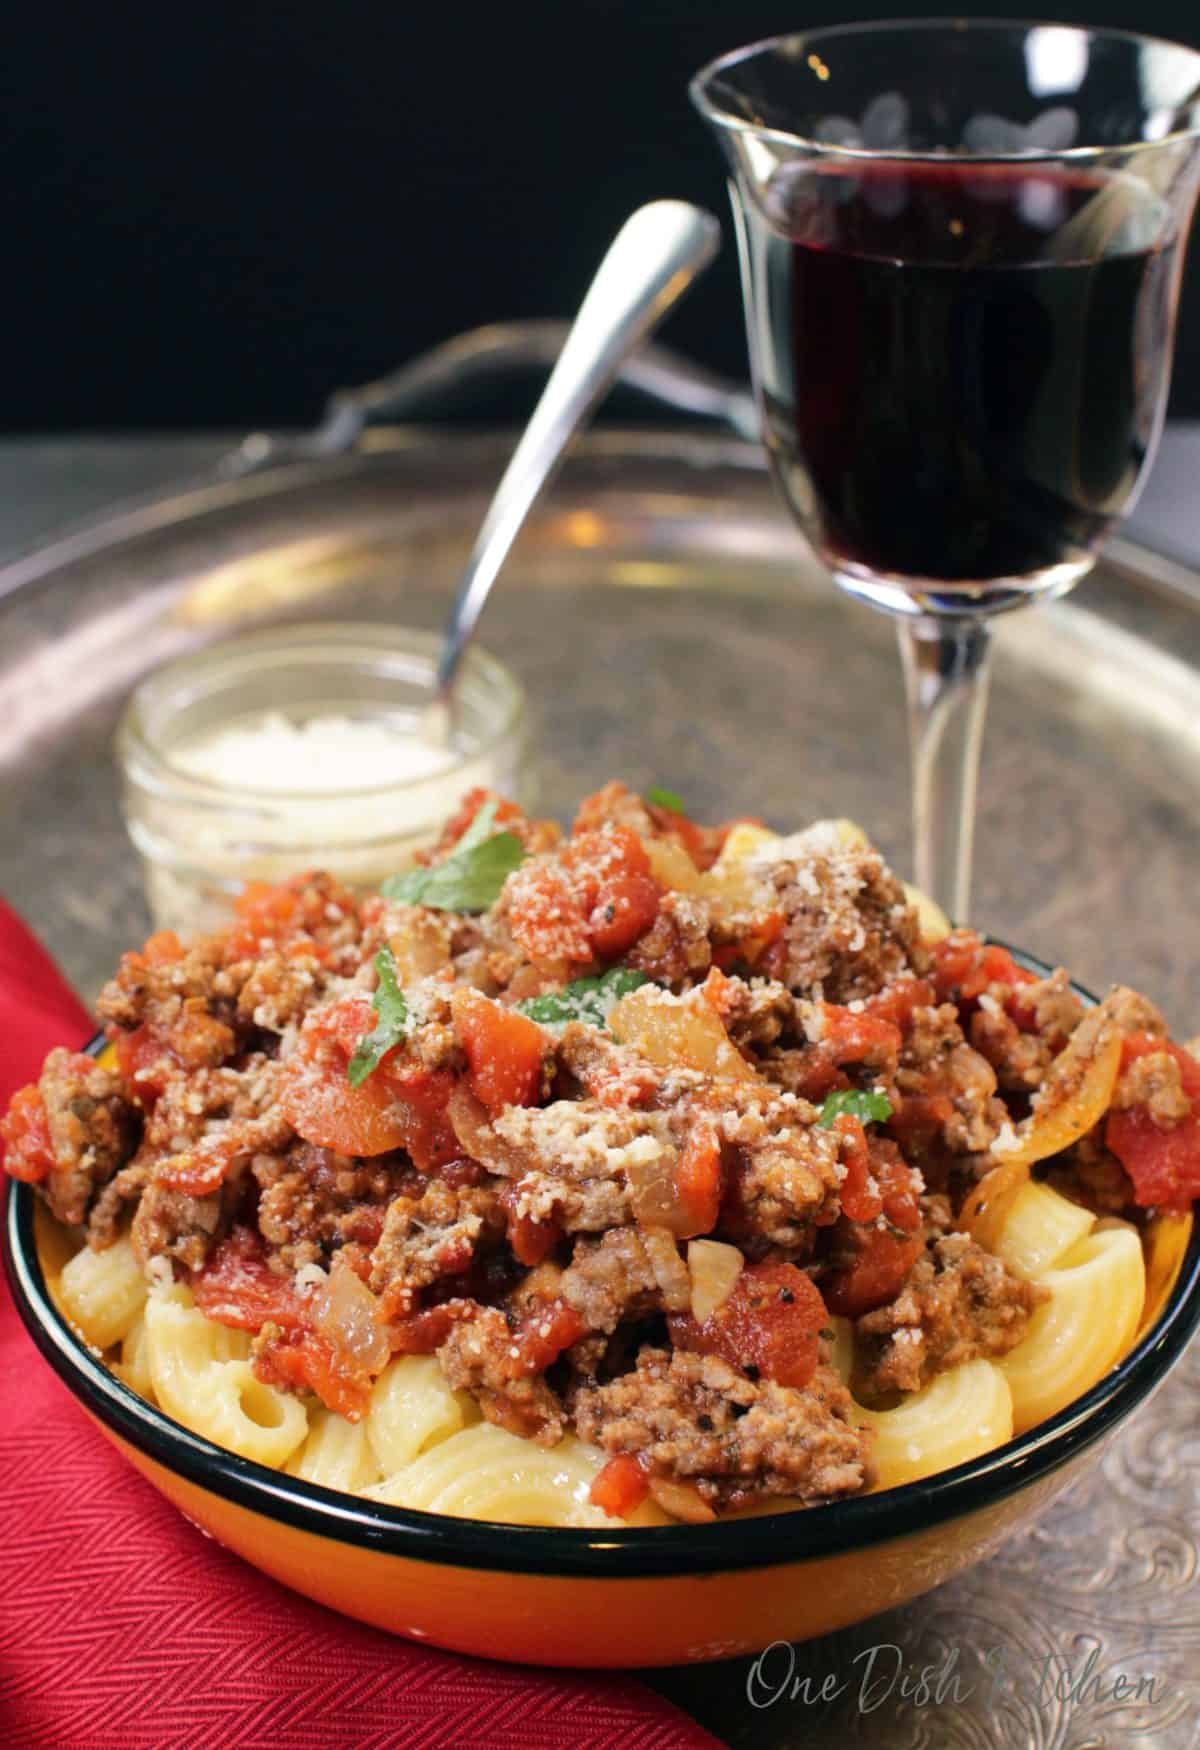 A bowl of meat sauce with pasta on a tray next to a tall glass of red wine.